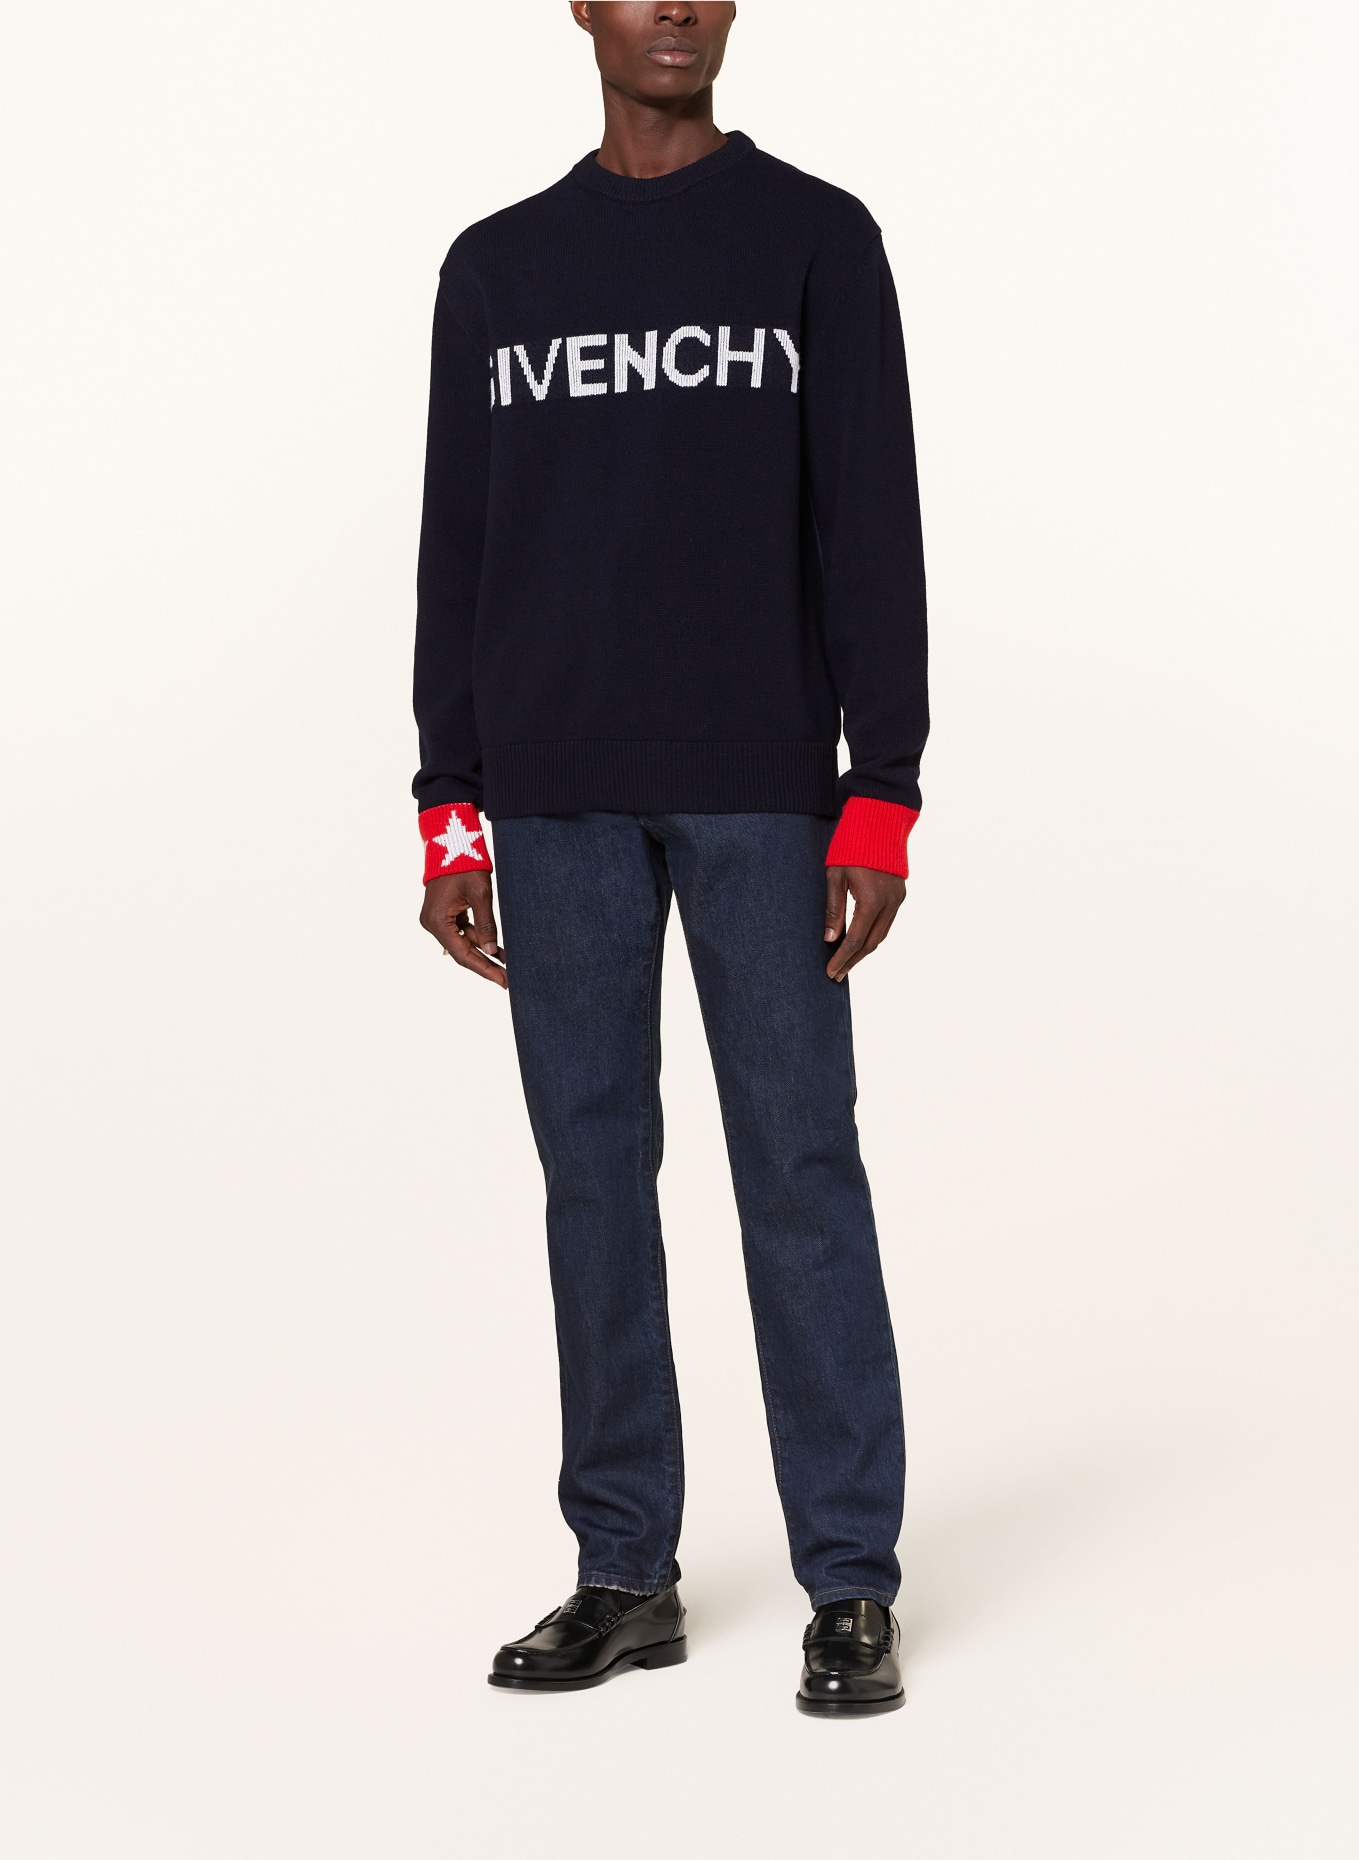 GIVENCHY Pullover, Farbe: DUNKELBLAU/ WEISS/ ROT (Bild 2)